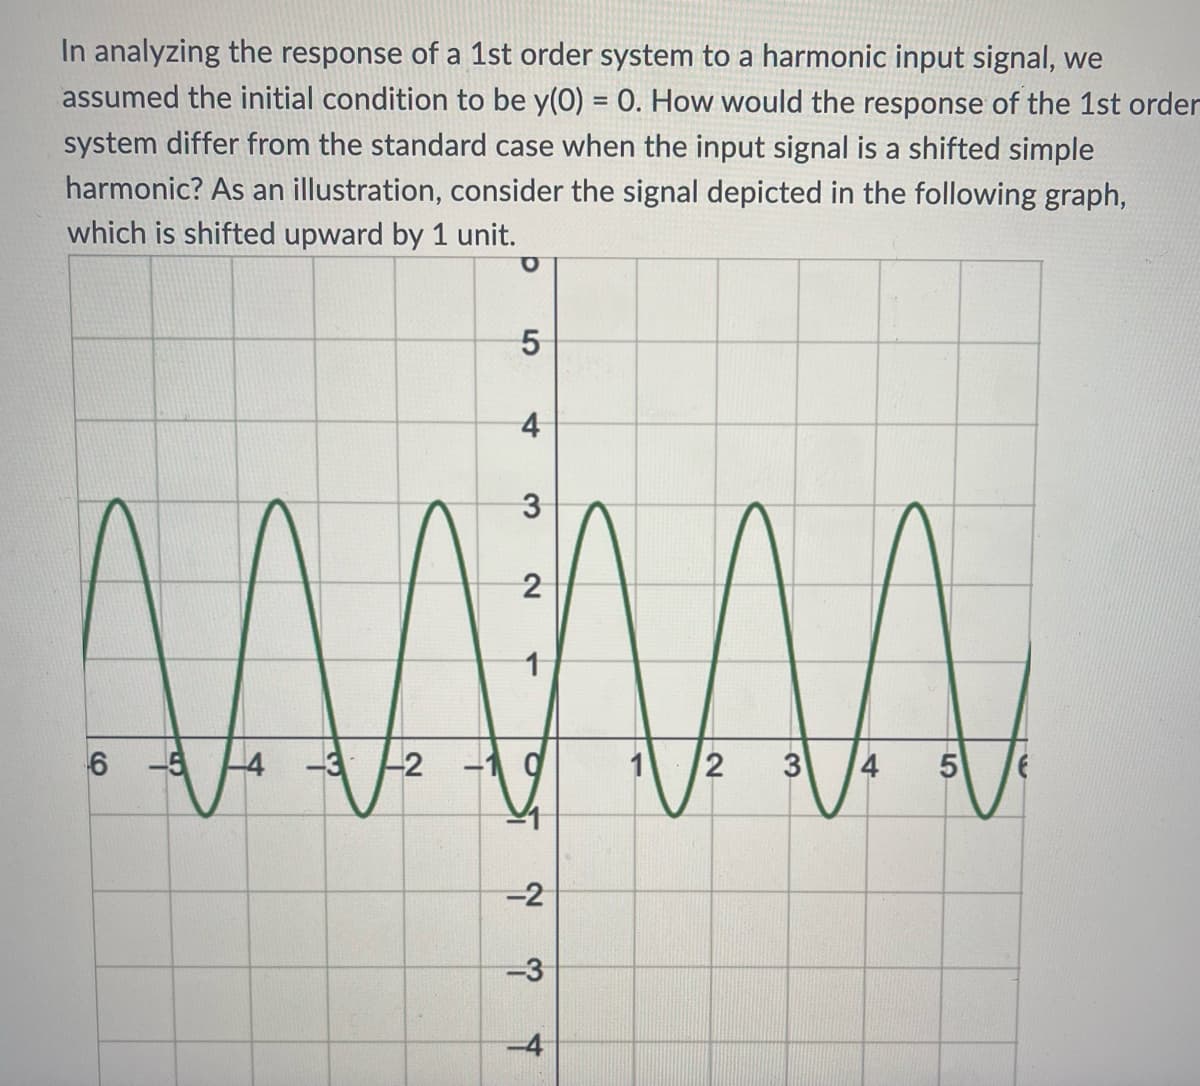 In analyzing the response of a 1st order system to a harmonic input signal, we
assumed the initial condition to be y(0) = 0. How would the response of the 1st order
system differ from the standard case when the input signal is a shifted simple
harmonic? As an illustration, consider the signal depicted in the following graph,
which is shifted upward by 1 unit.
O
6 -5
-2
5
4
3
2
1
-2
-3
-4
2
3
5